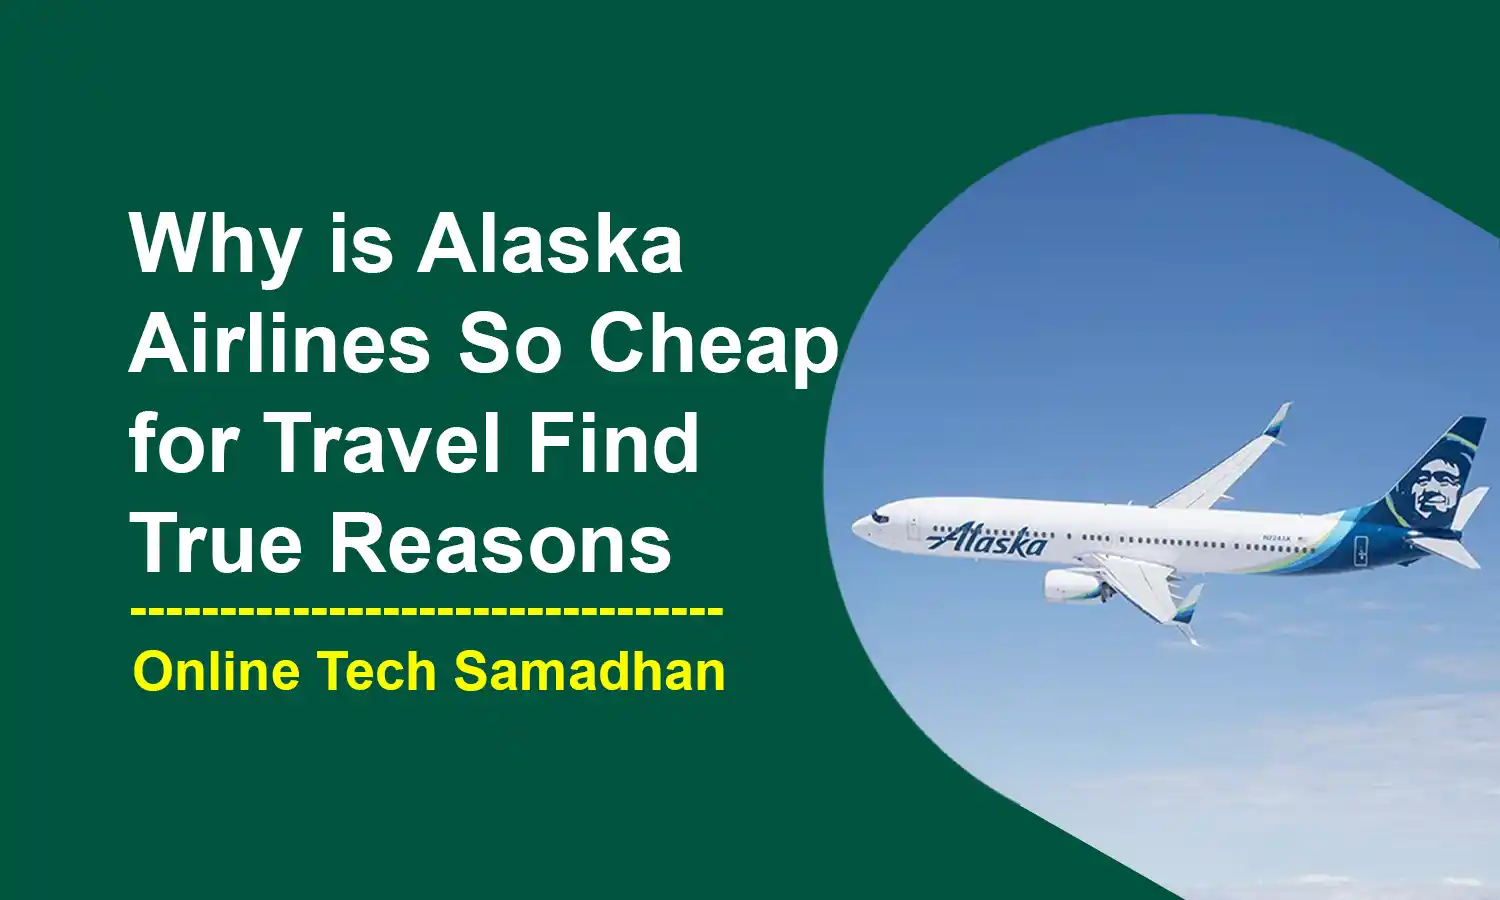 Why is Alaska Airlines So Cheap